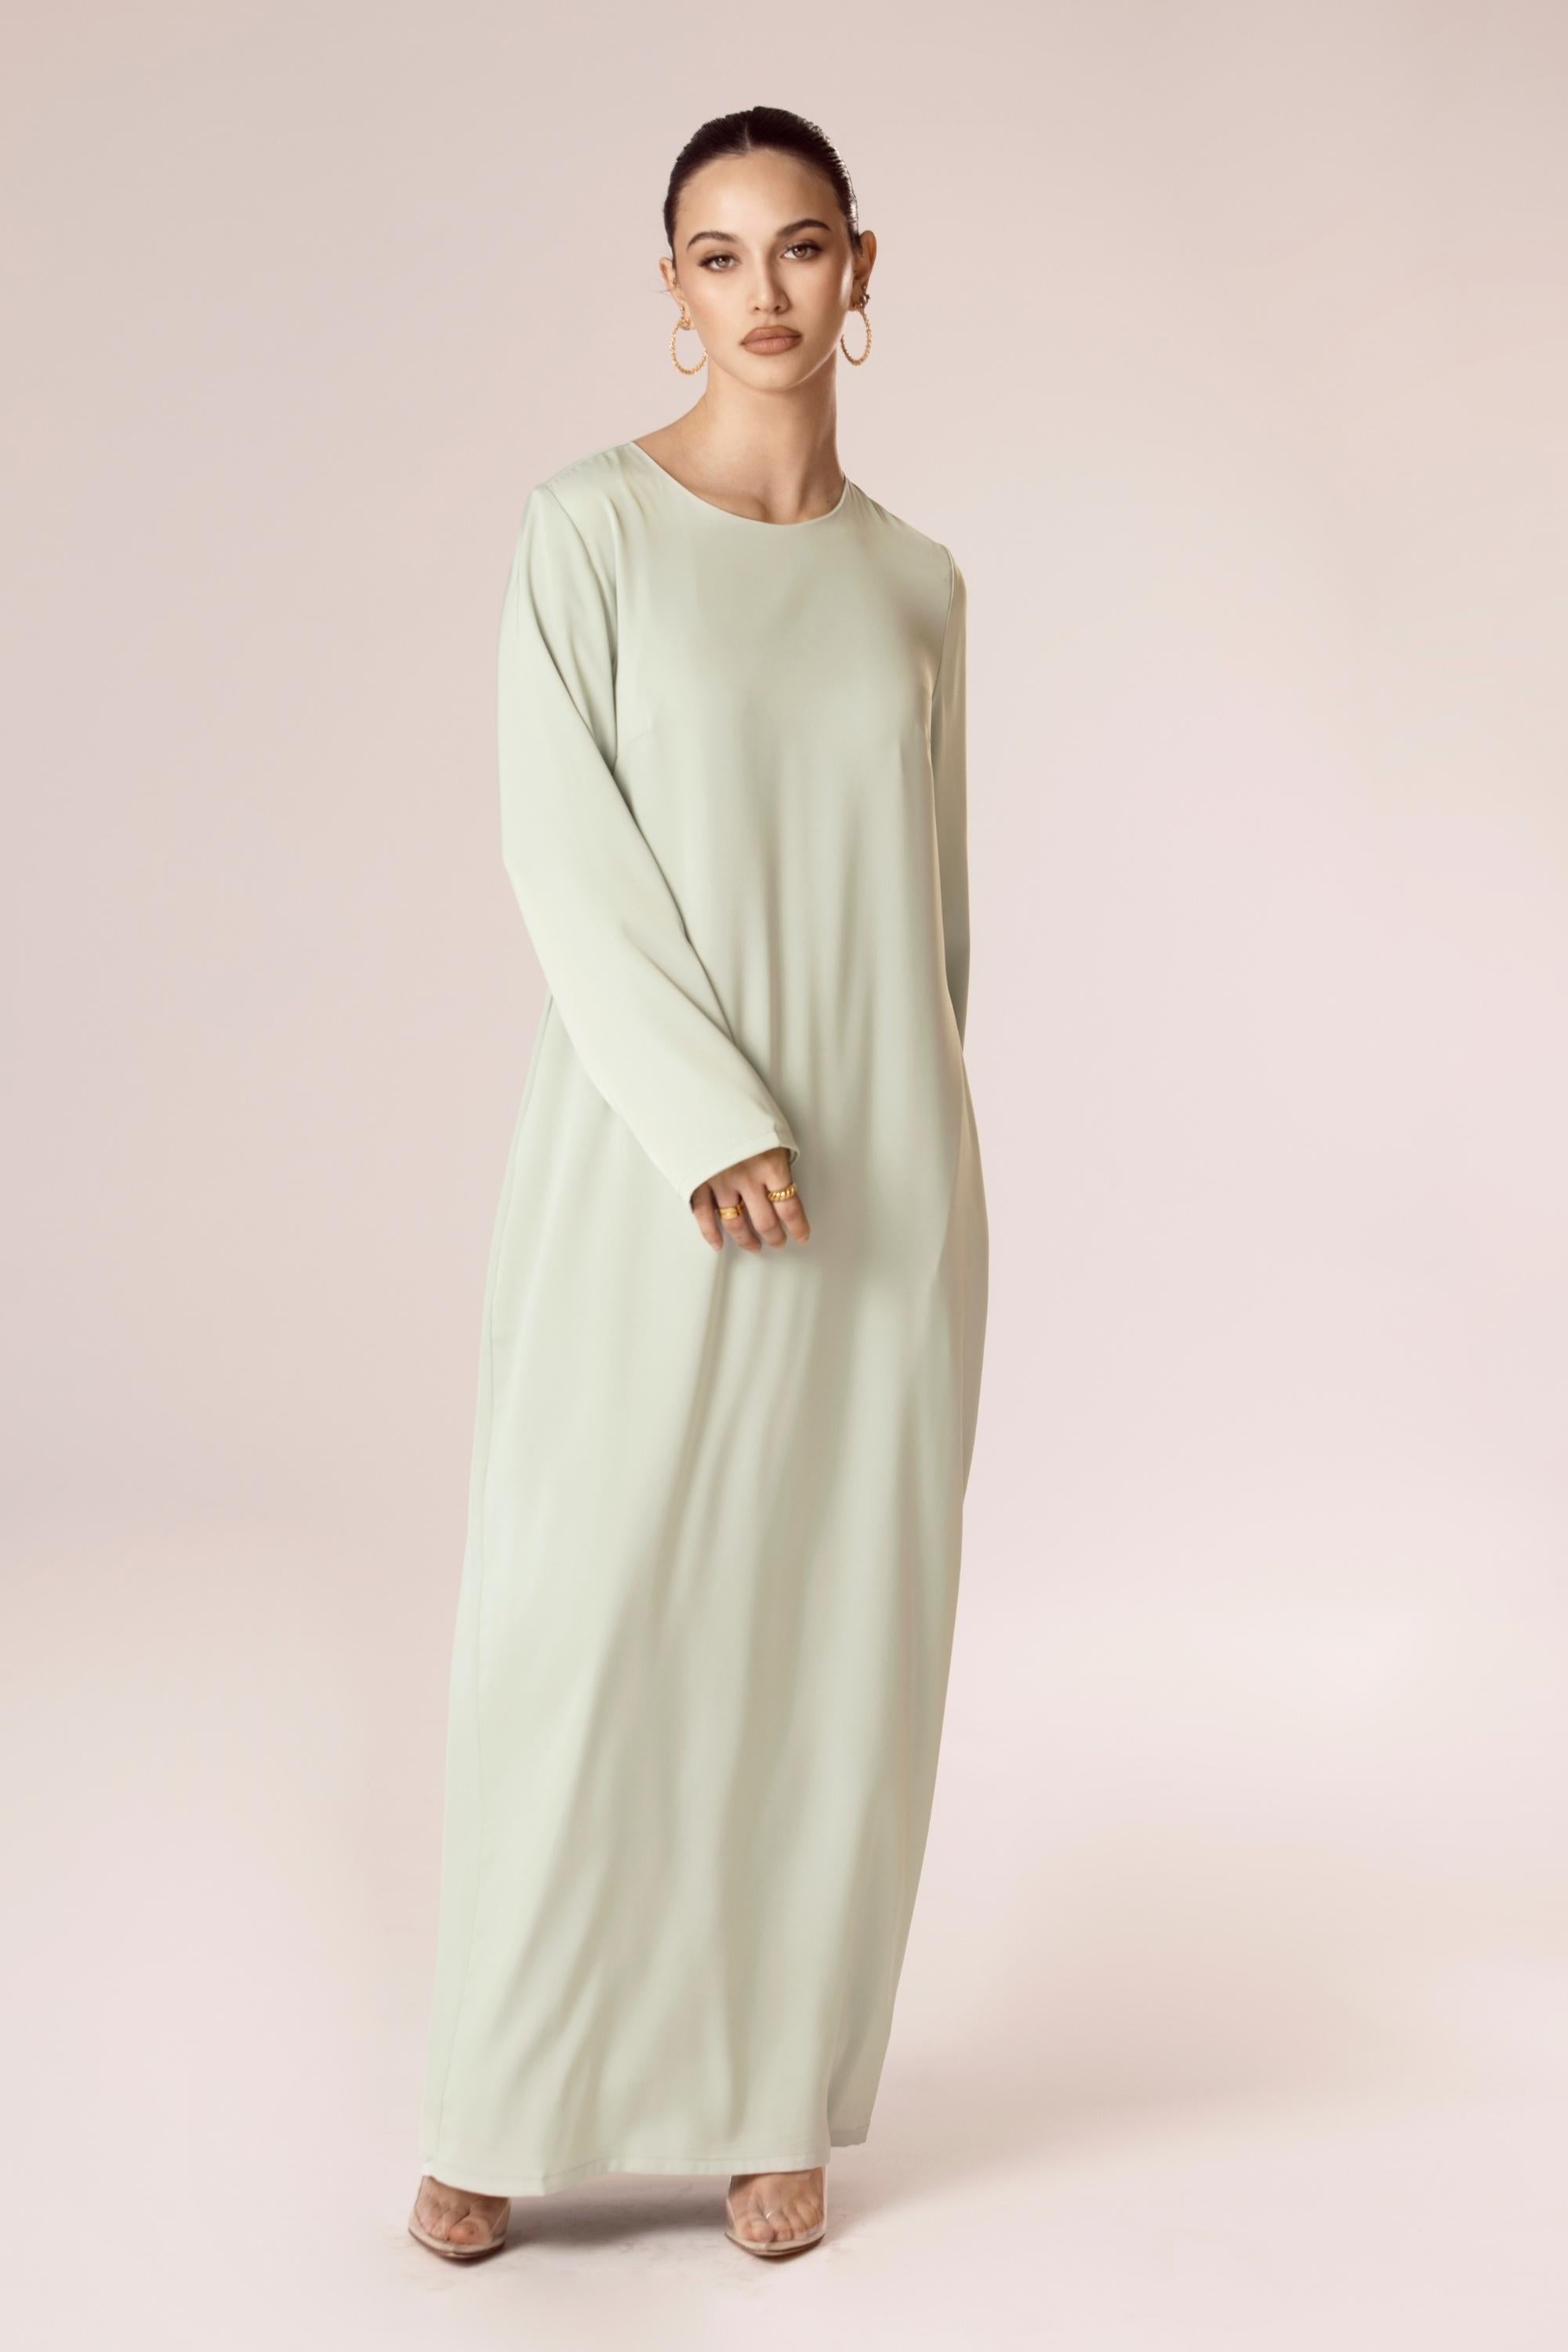 Angelina Maxi Slip Dress - Mint Green Veiled Collection 